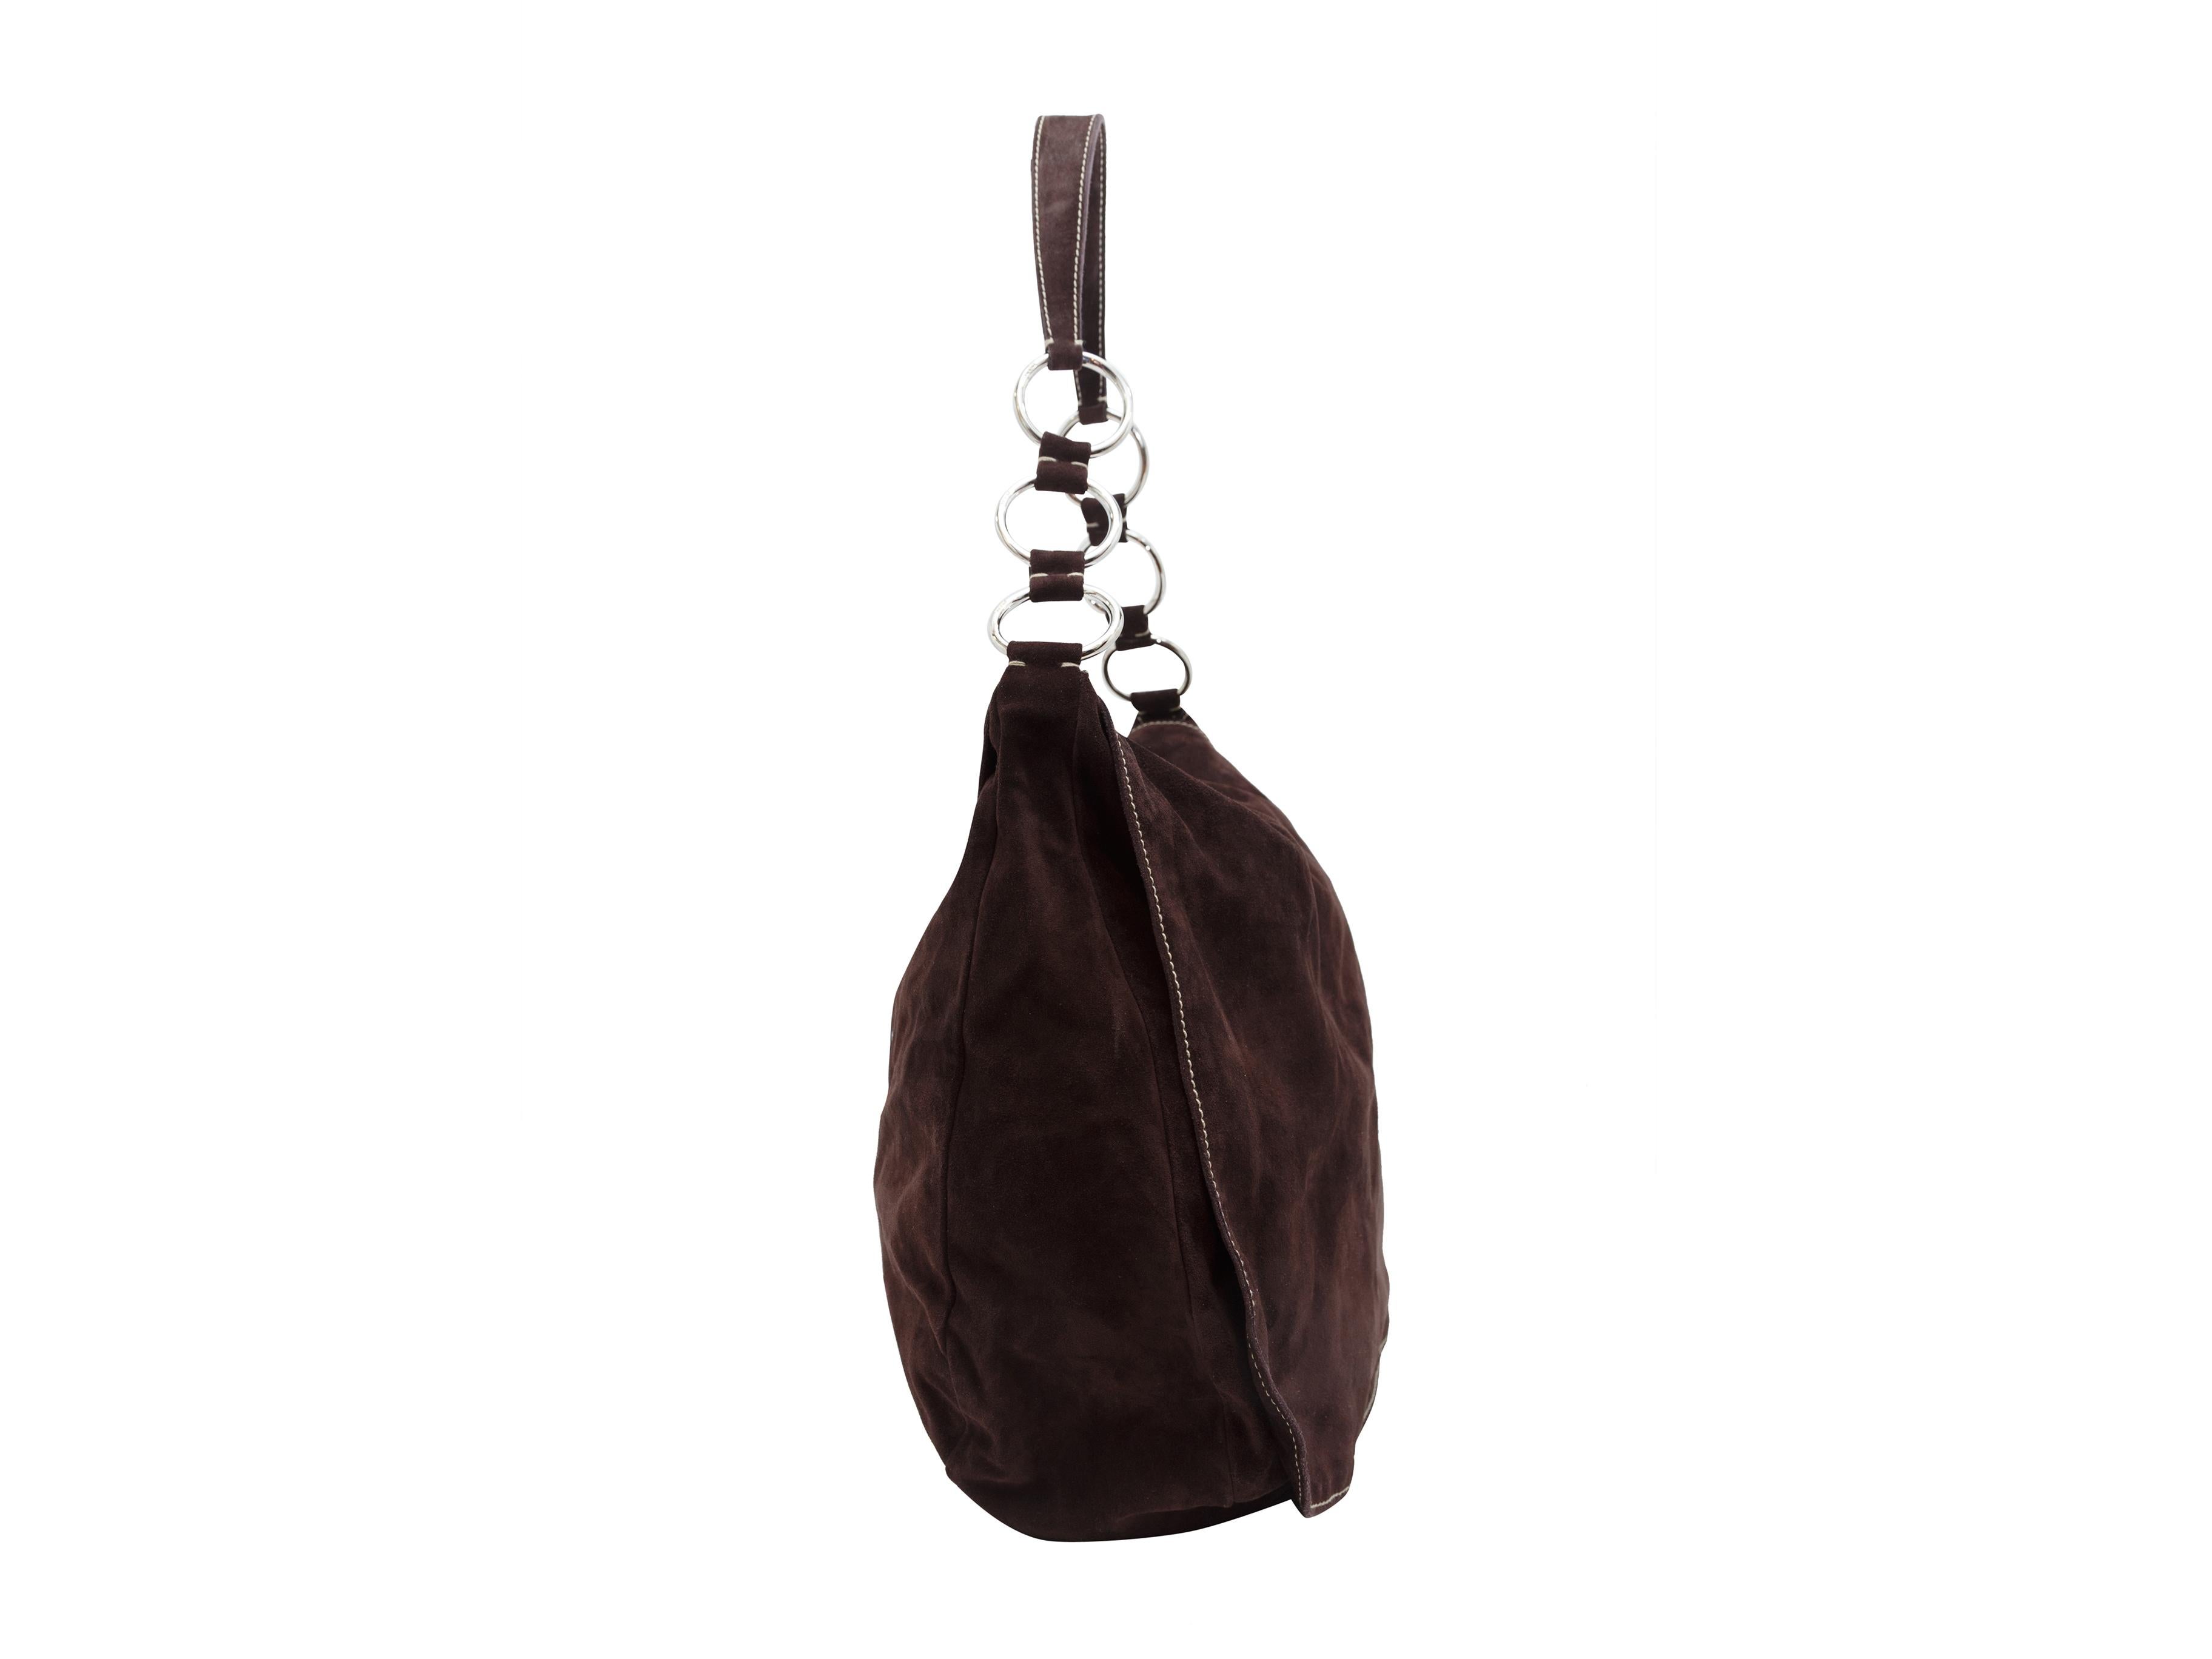 Product details: Brown Prada Suede Large Flap Bags. It has a top zipper closure, interior zippered compartment, and a large foldover flap. The shoulder strap is a mix of suede and silver tone links. 14